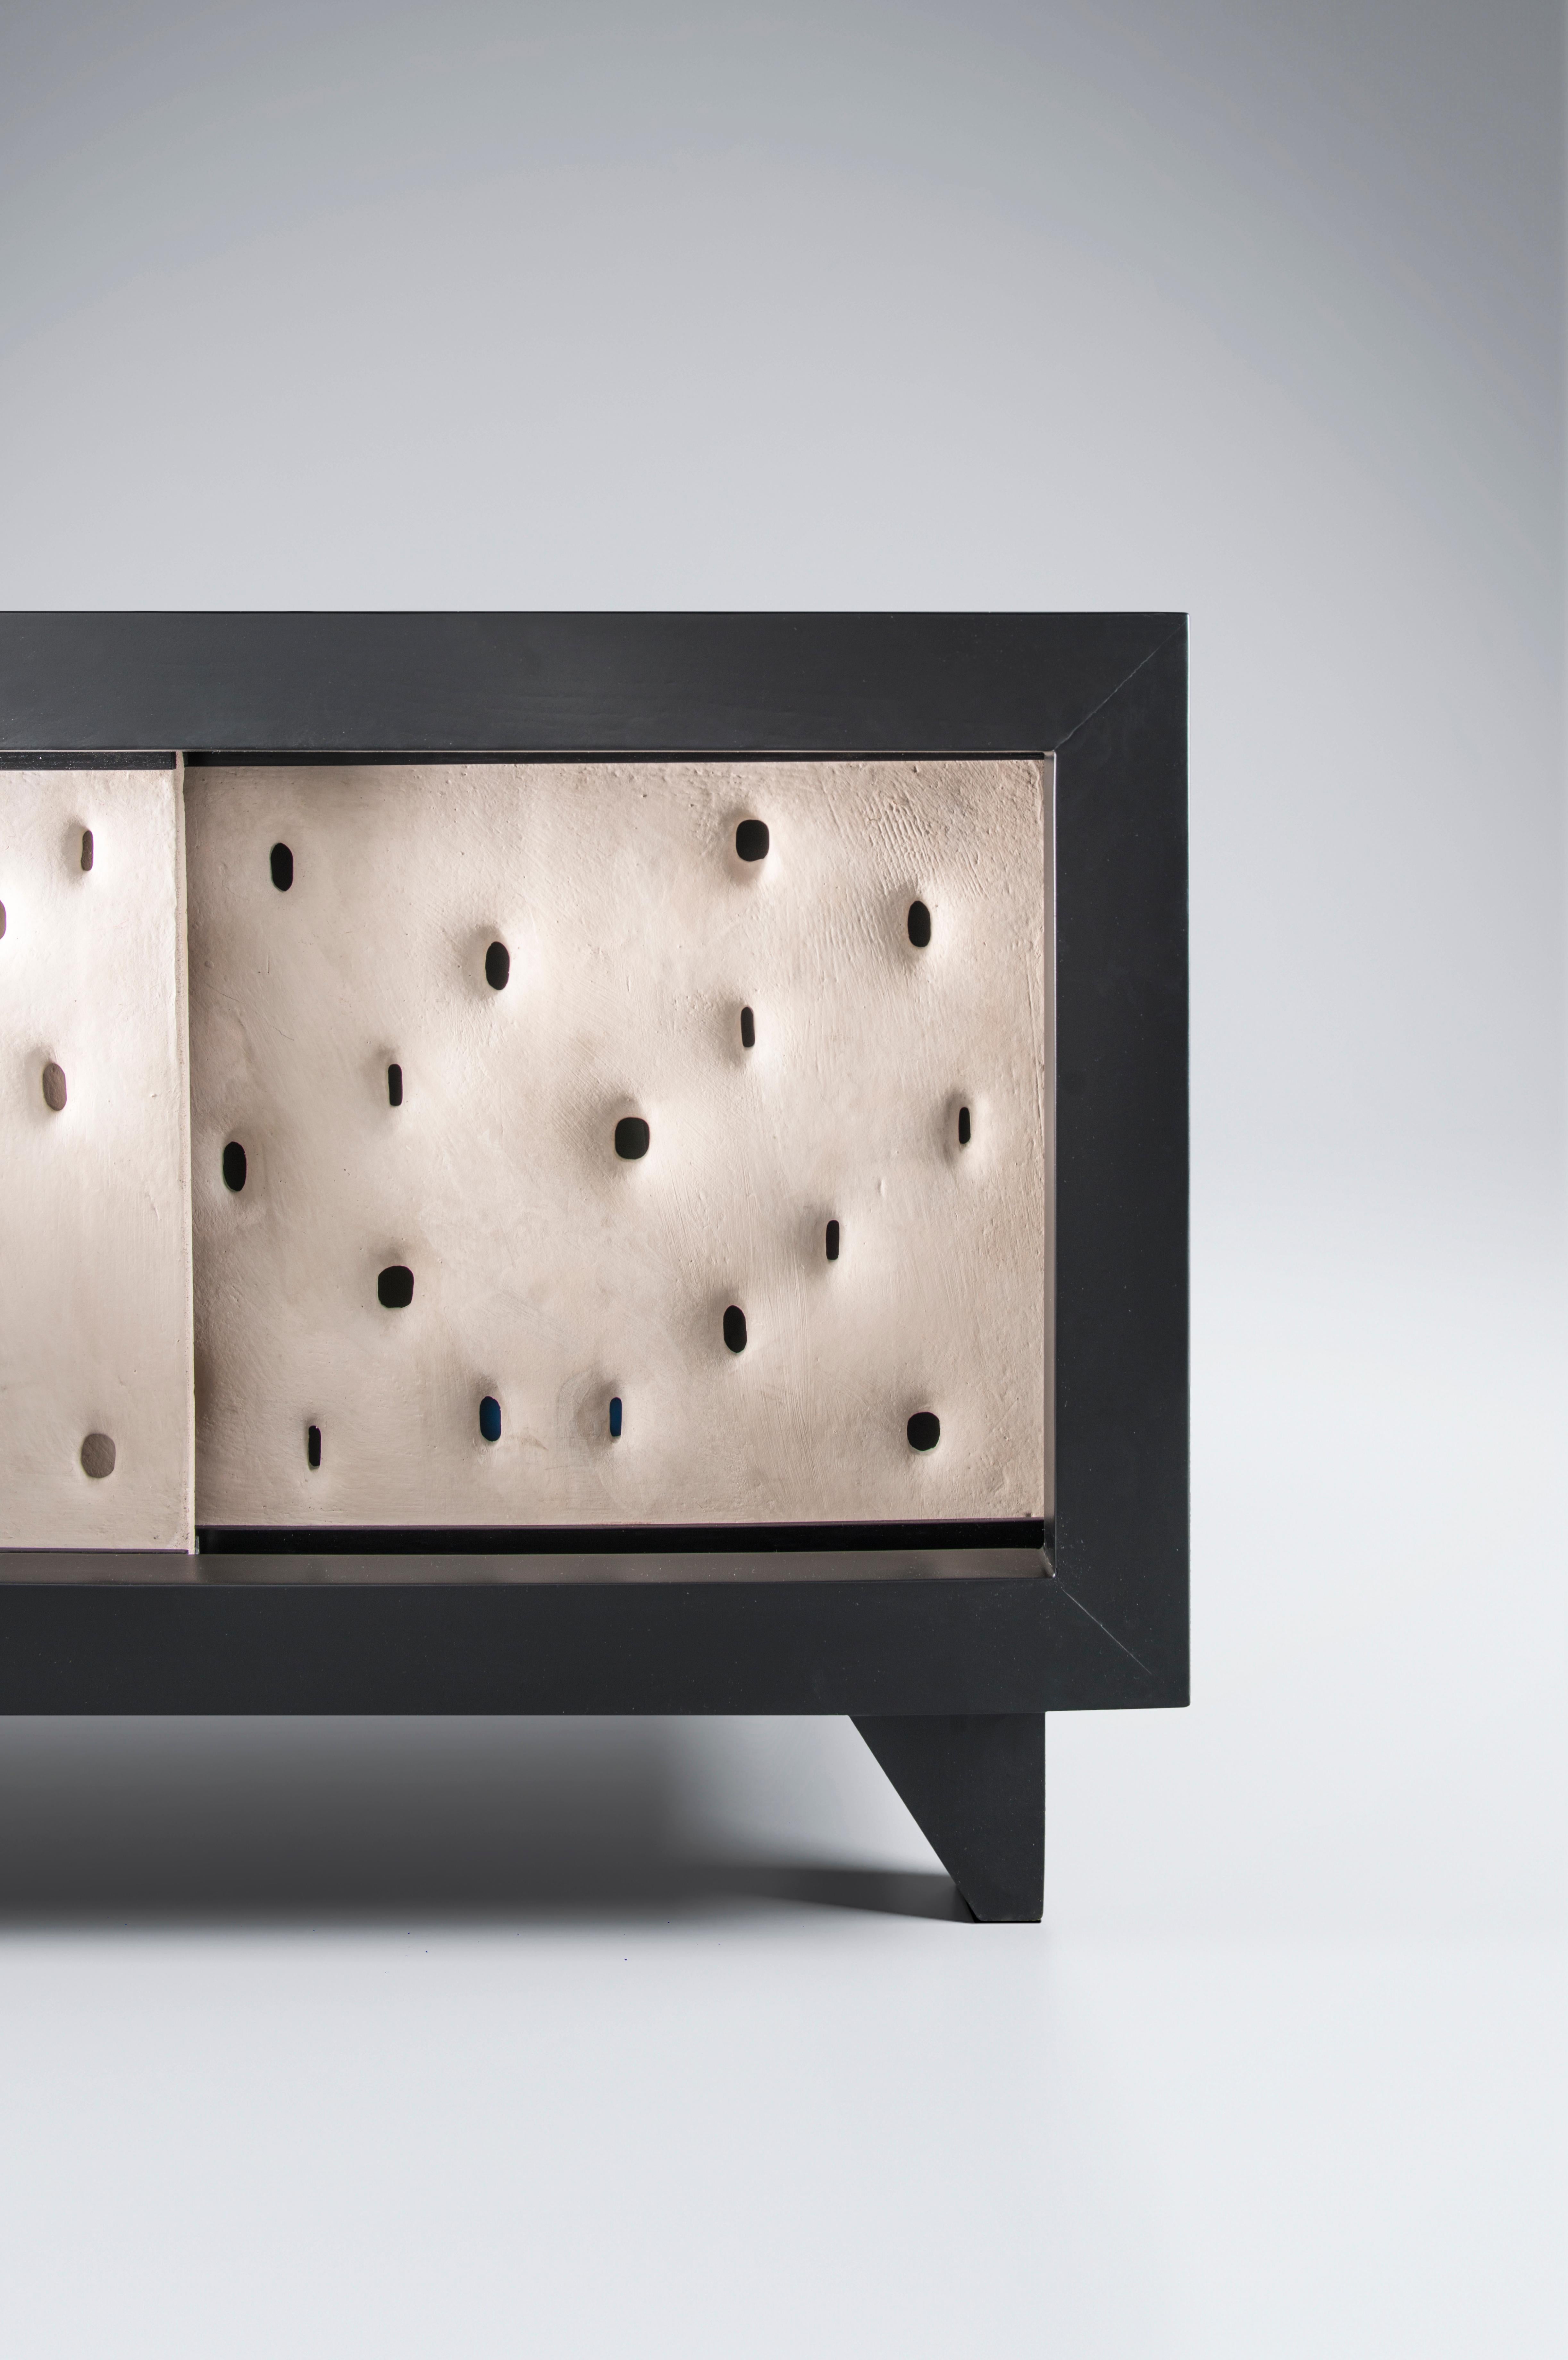 Ceramic contemporary cabinet by FAINA
Design: Victoriya Yakusha
Material: Clay, Ash
Dimensions: 175 x 50 x H 58.5 cm

Made in the style of ethnic minimalism, the collection items introduce “naive design”- simple in form, yet with a deep philosophy